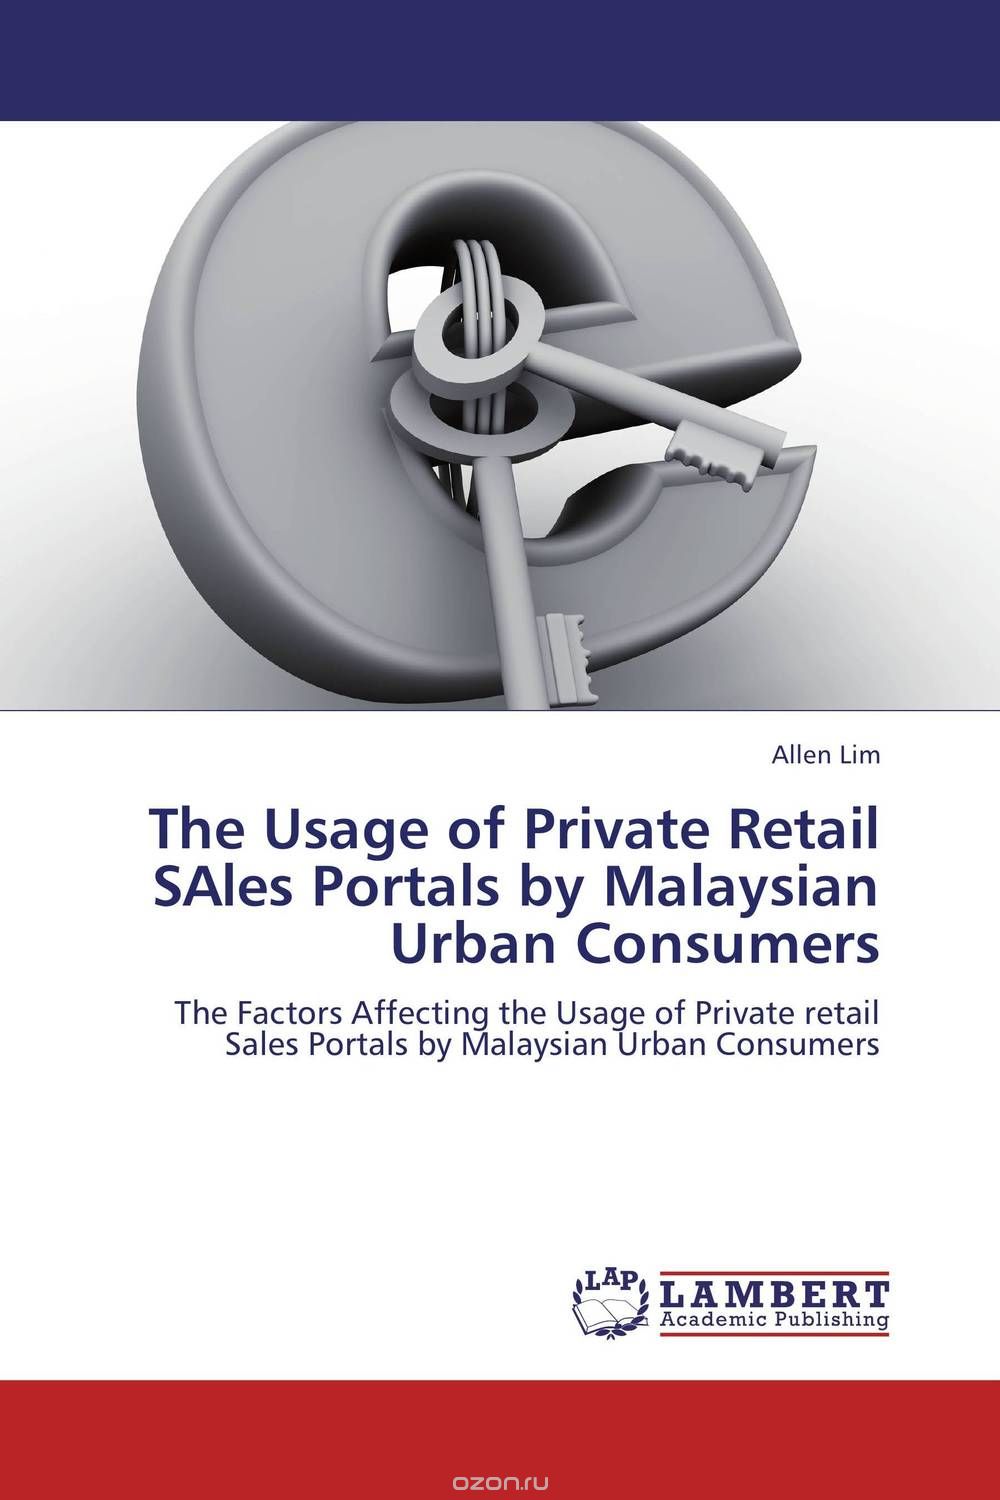 The Usage of Private Retail SAles Portals by Malaysian Urban Consumers